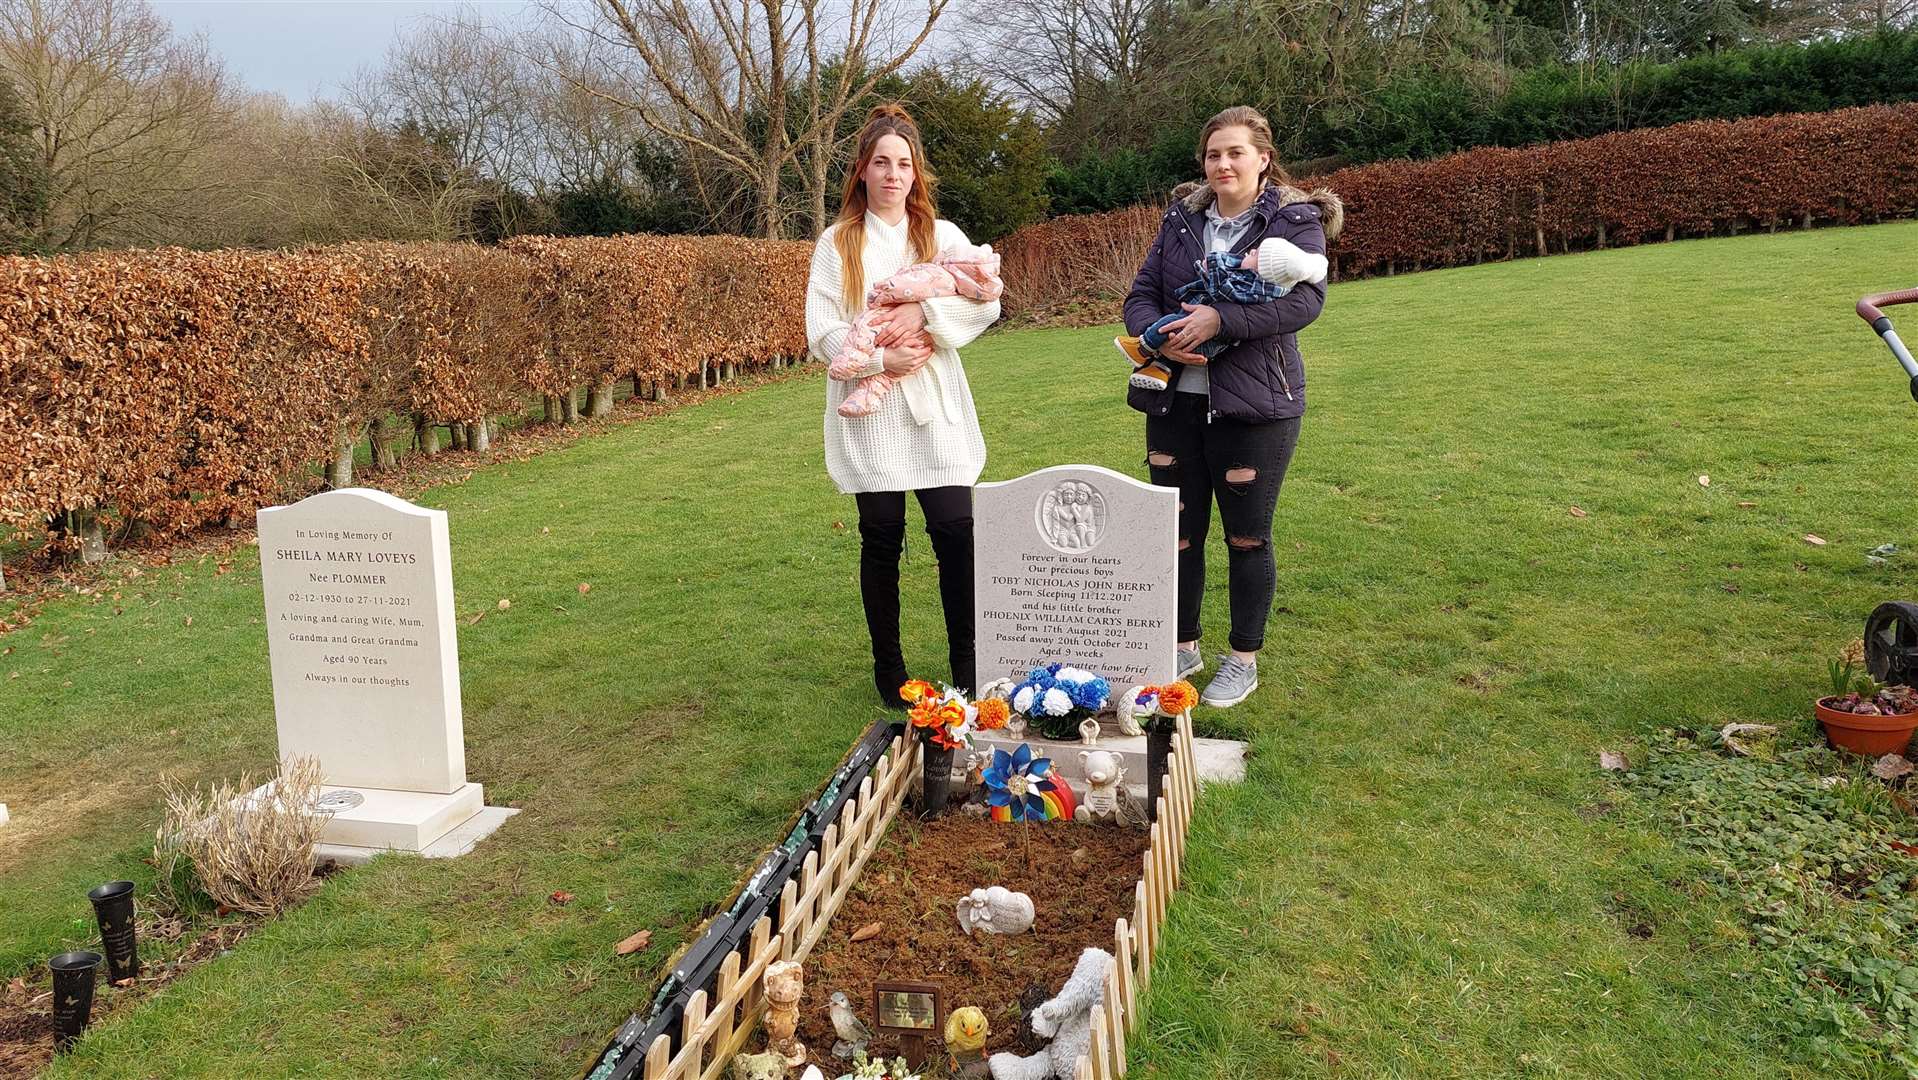 The grieving mums, pictured at the cemetery in Boughton-under-Blean, say decorating the graves is their way of showing their love